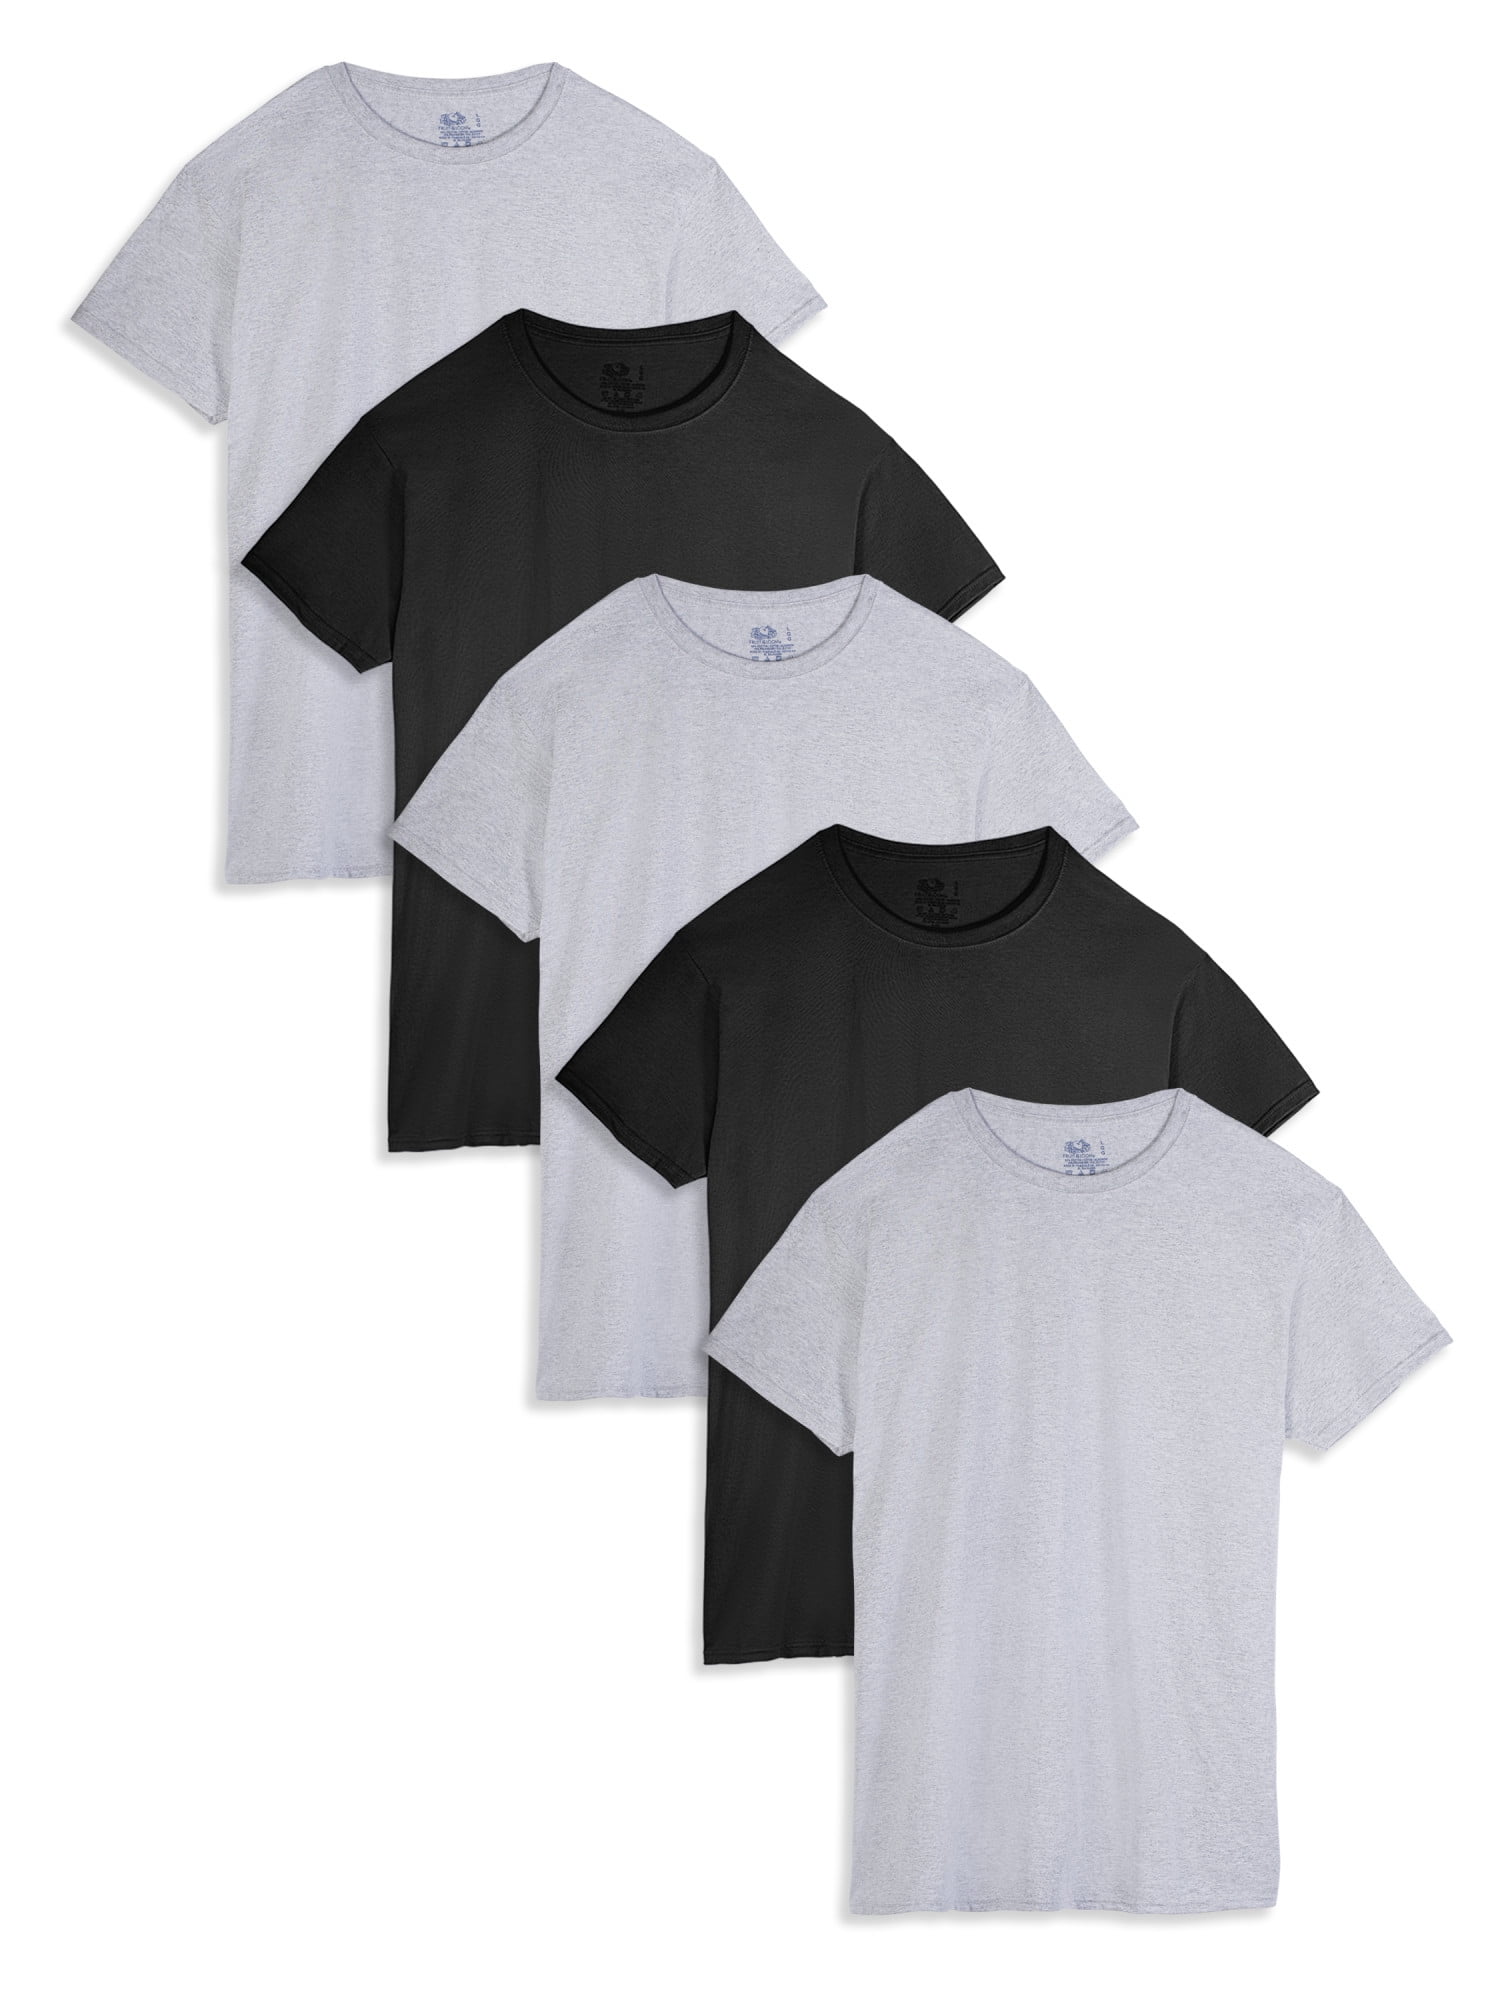 Fruit of the Loom Men's Black and Gray Crew Undershirts, 5 Pack, Sizes ...